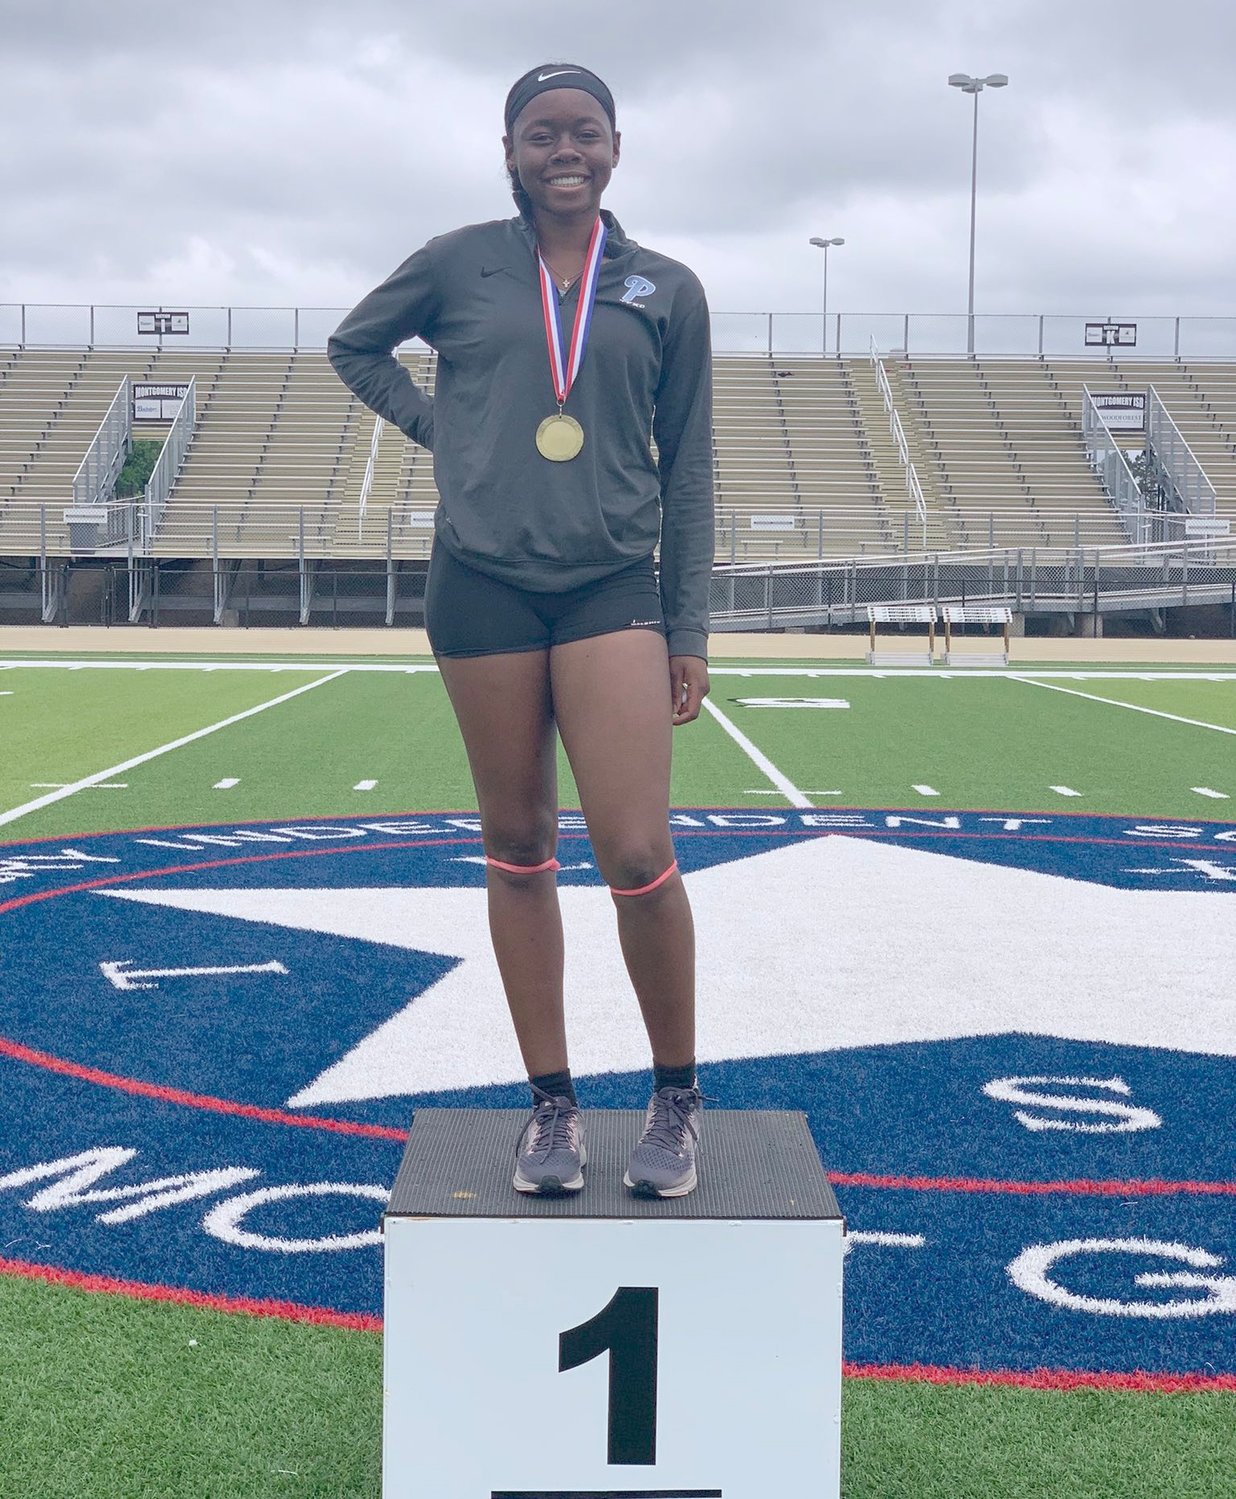 Paetow senior Tumi Onaleye earned gold in the long jump (18-feet, 5.25-inches) and triple jump (40-feet, 1.5-inches) and took silver in the 100-meter hurdles (15.90 seconds) and 300-meter hurdles (46.570 seconds) in a dominant performance at the 19-20-5A meet on Thursday, April 15, at Montgomery High School.